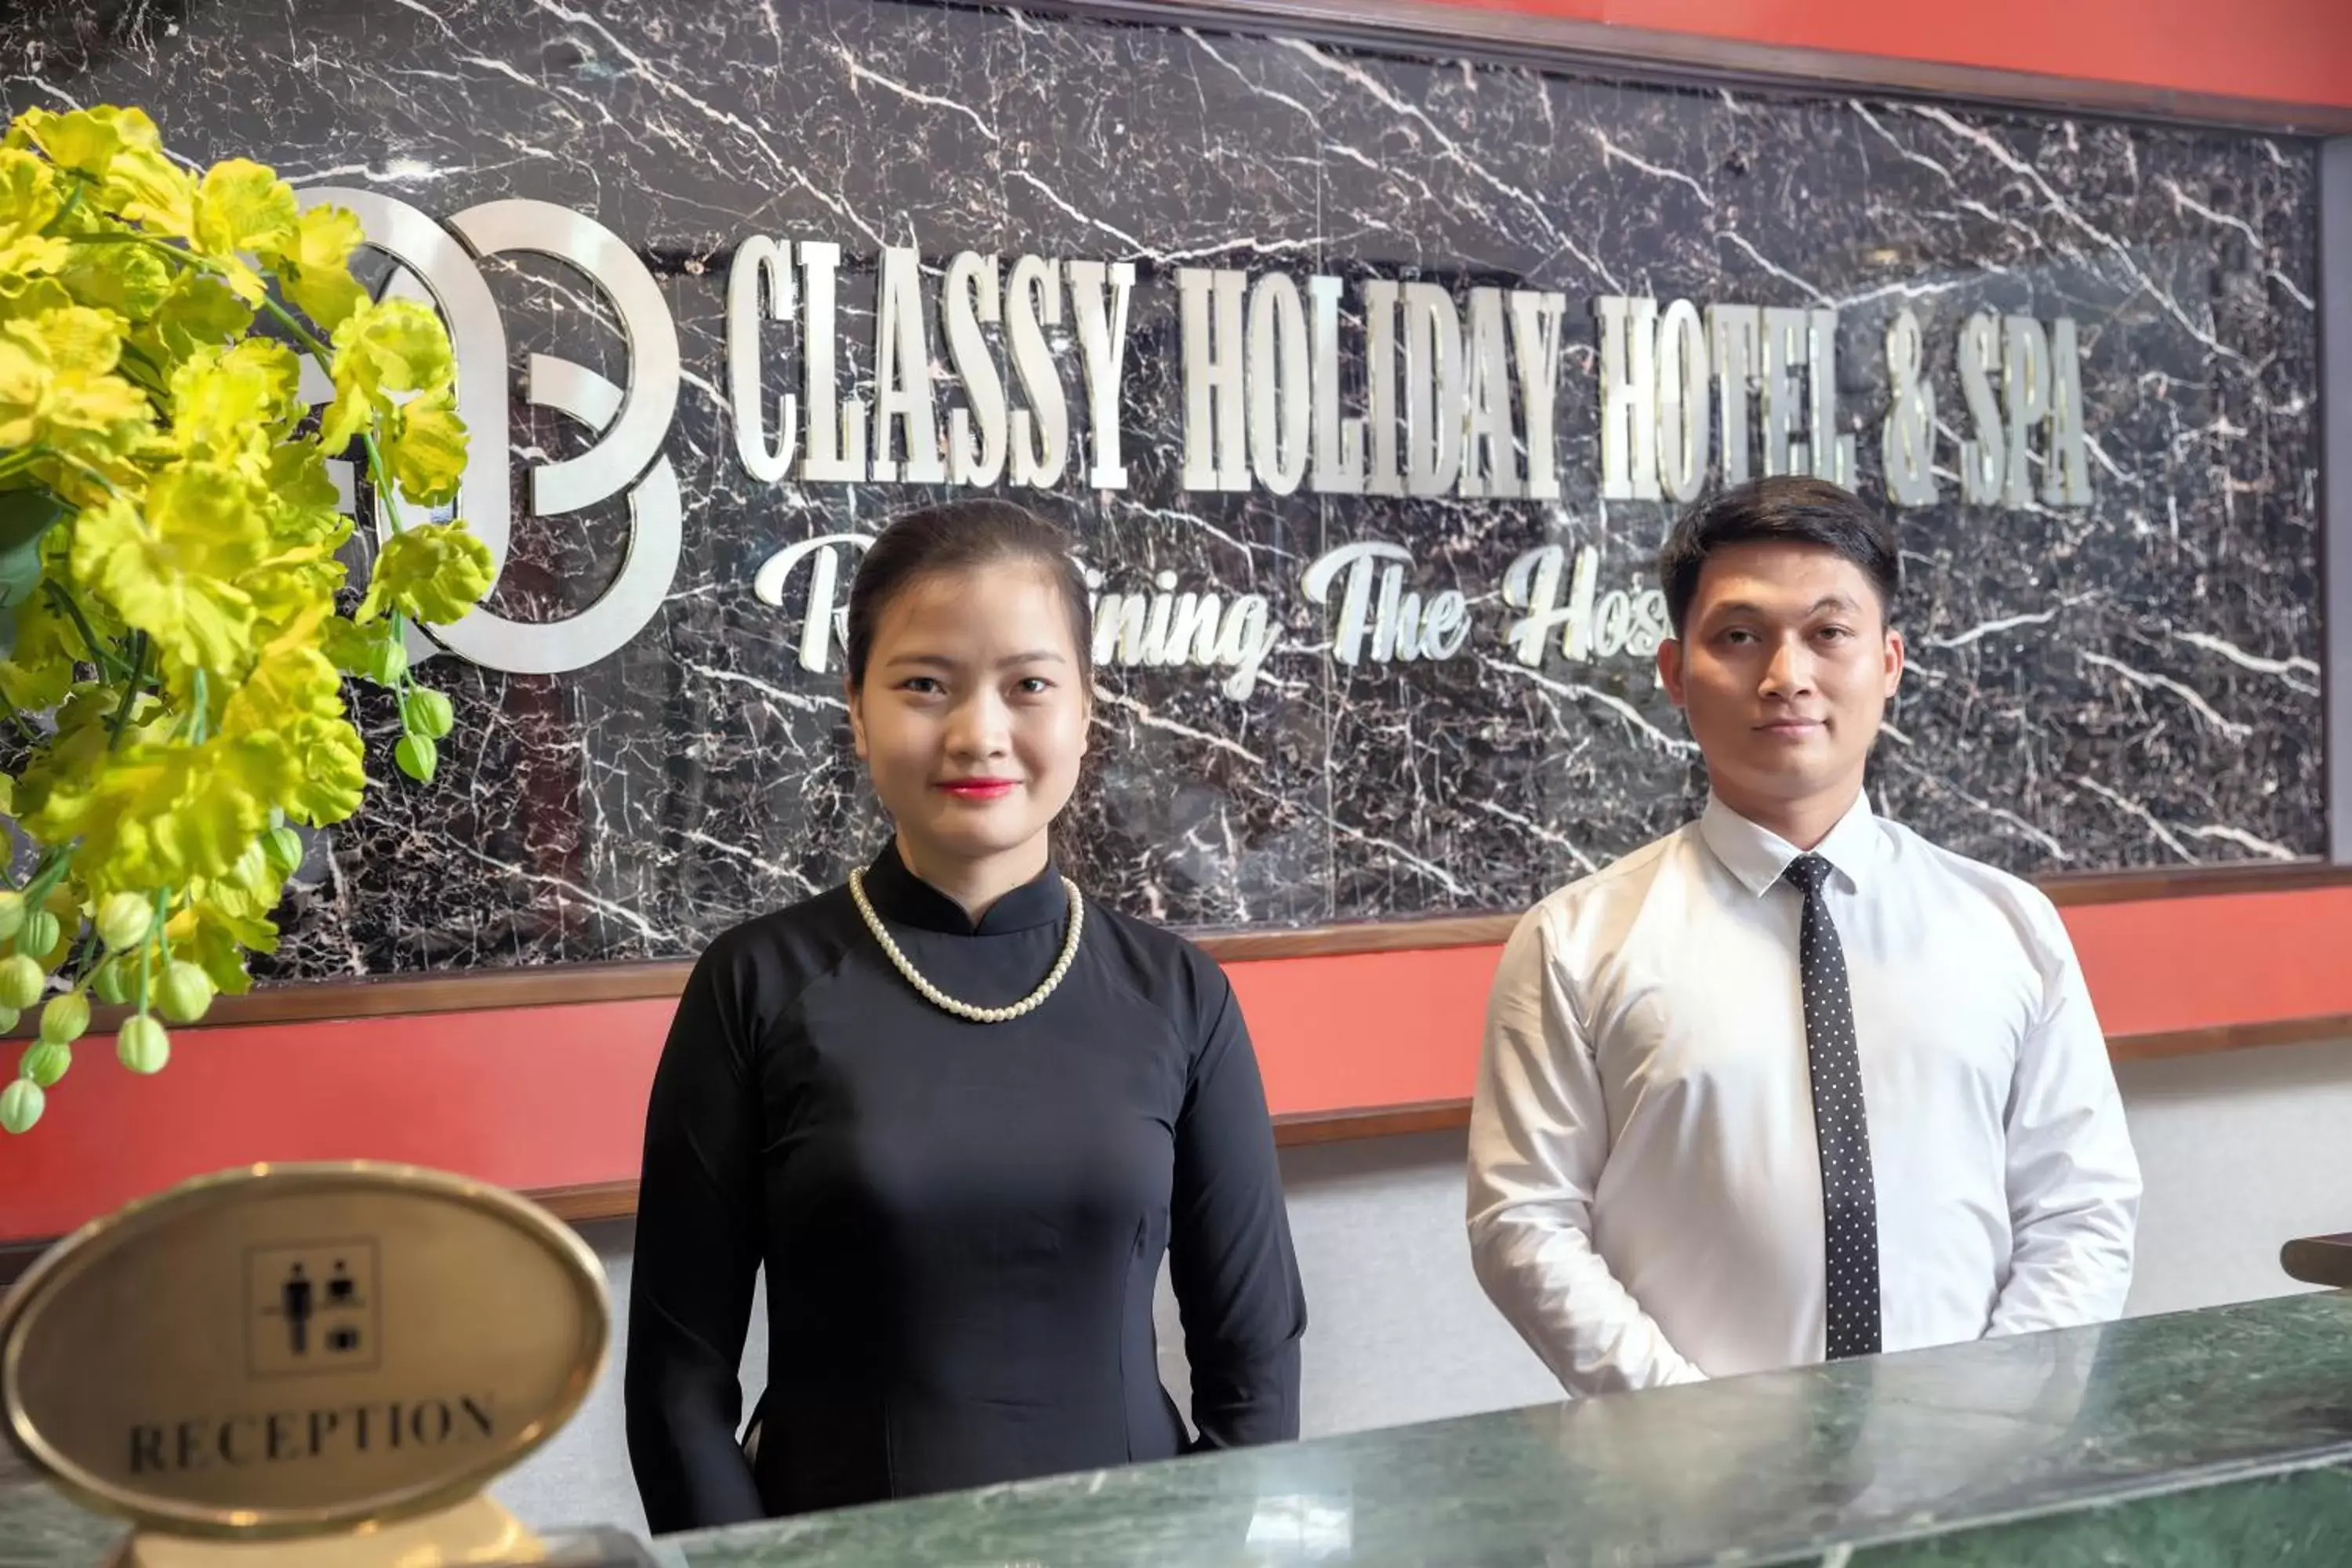 Staff in Classy Holiday Hotel & Spa